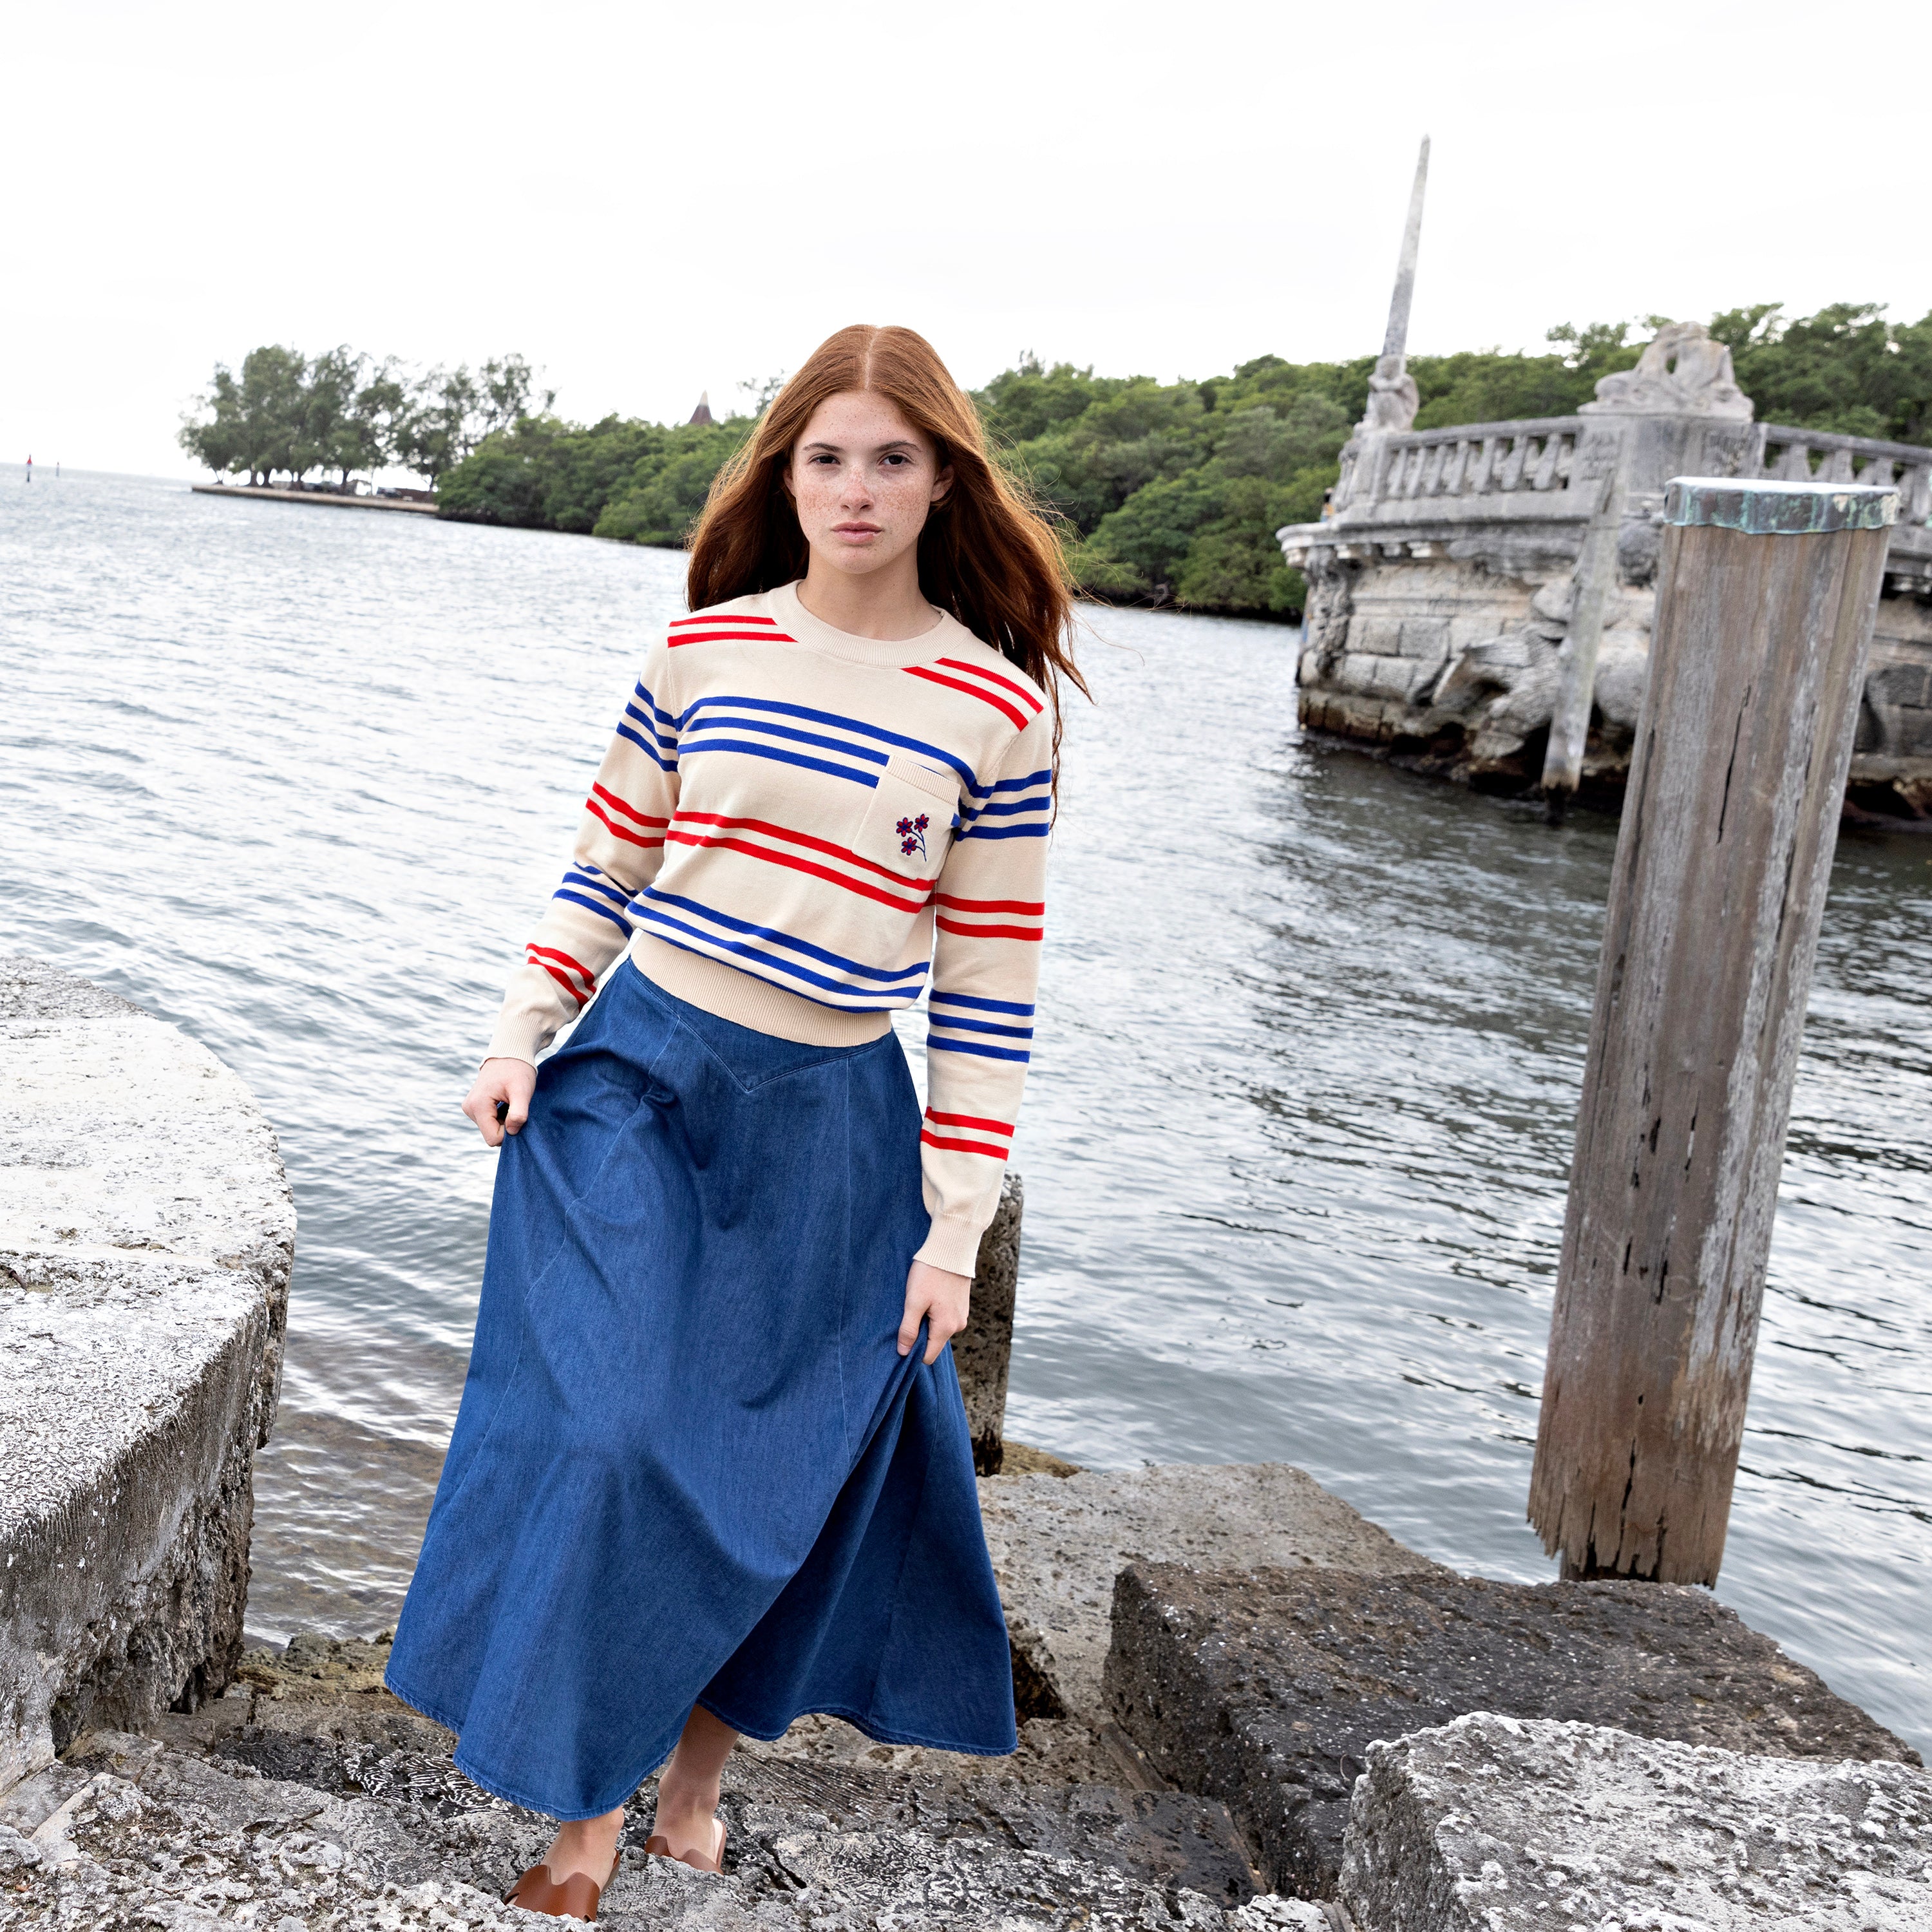 Tan Sweater With Royal Blue and Red Stripes